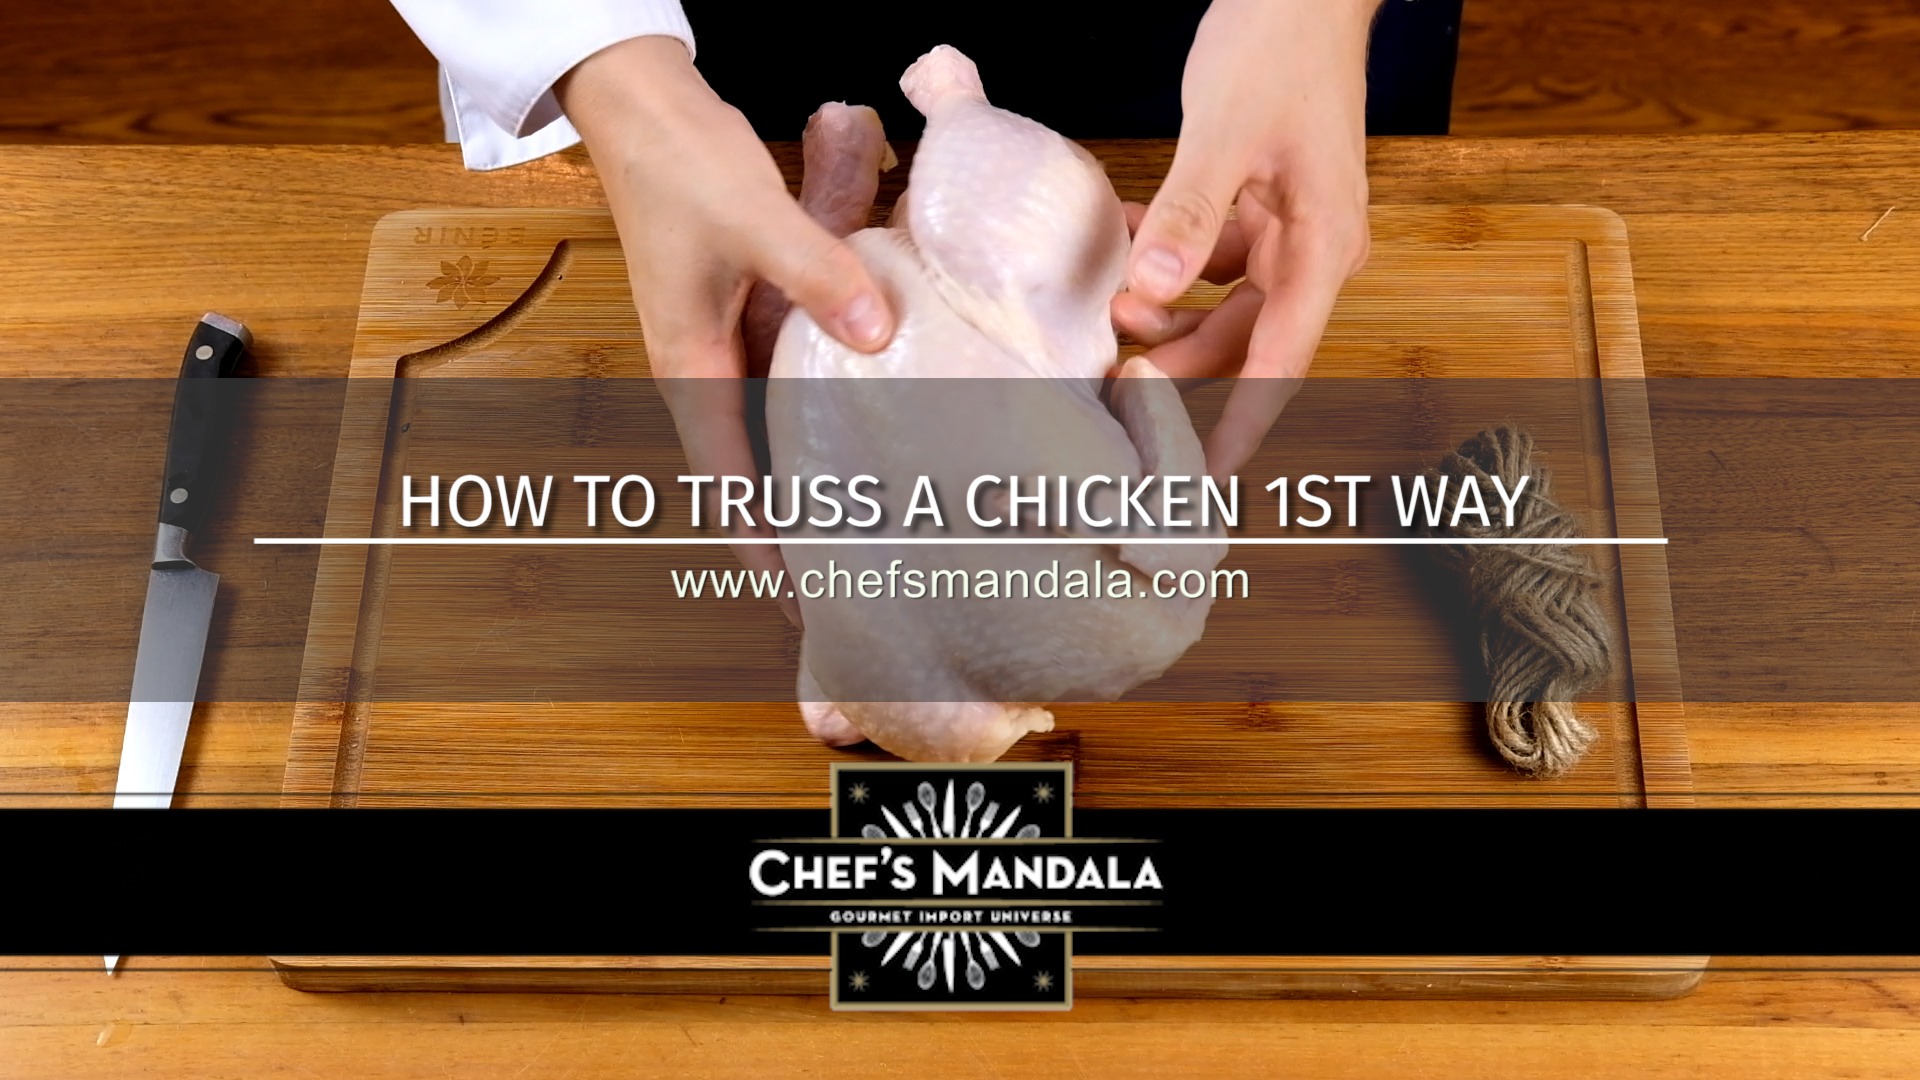 HOW TO TRUSS A CHICKEN 1ST WAY